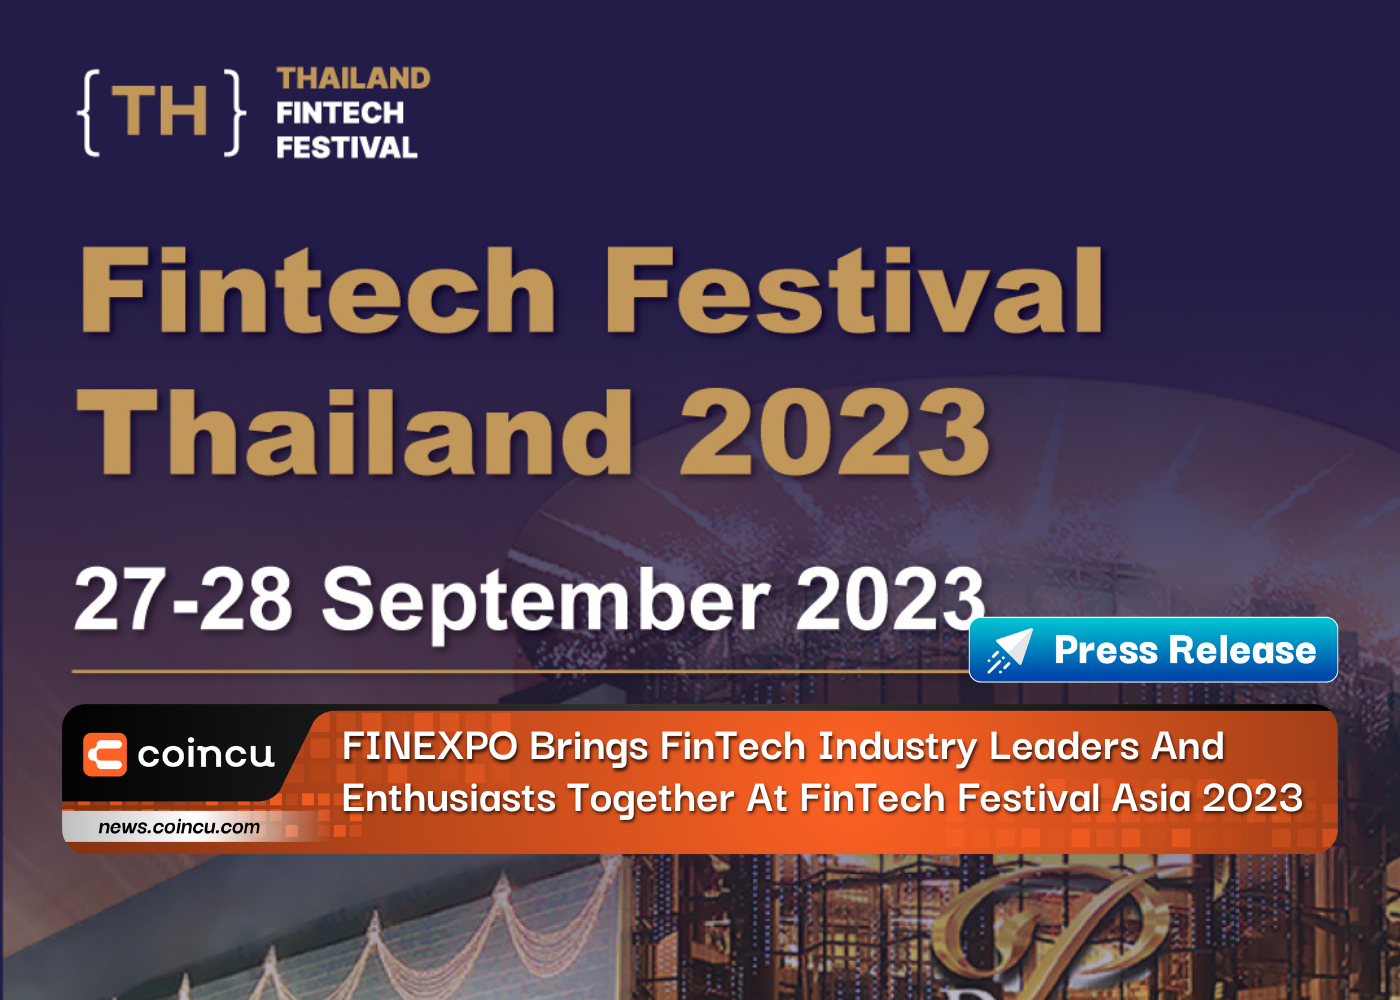 FINEXPO Brings FinTech Industry Leaders And 1